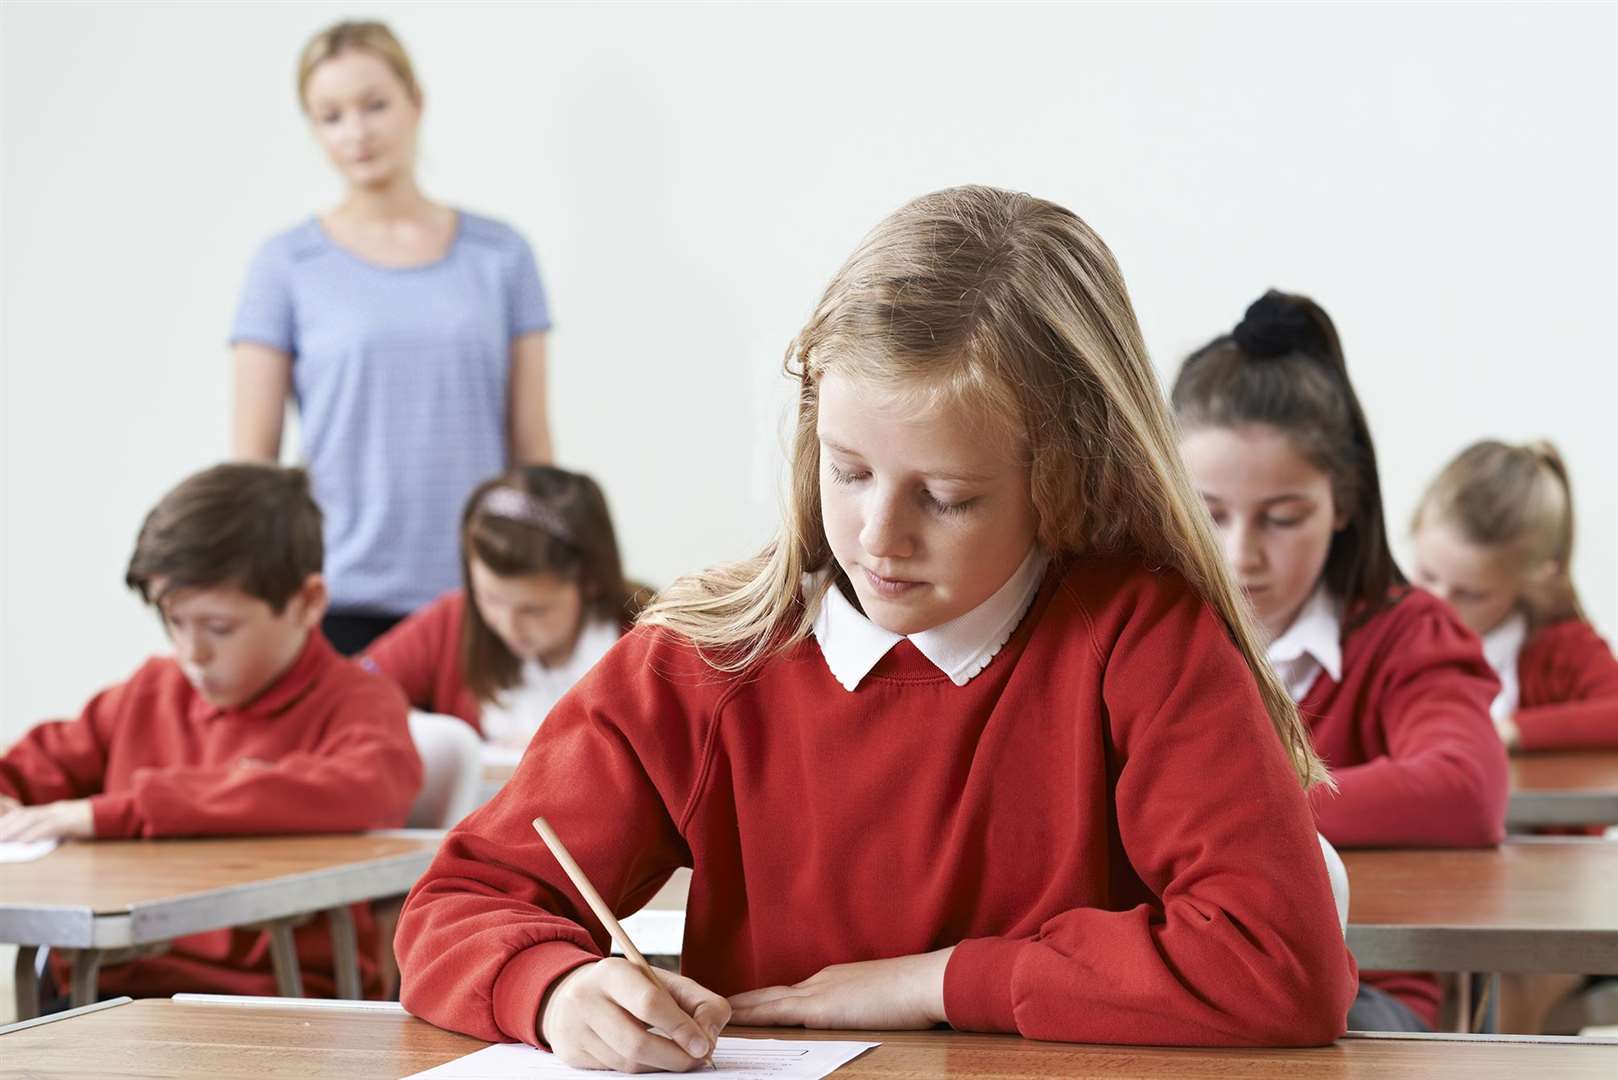 More than 1,600 pupils passed the Medway test